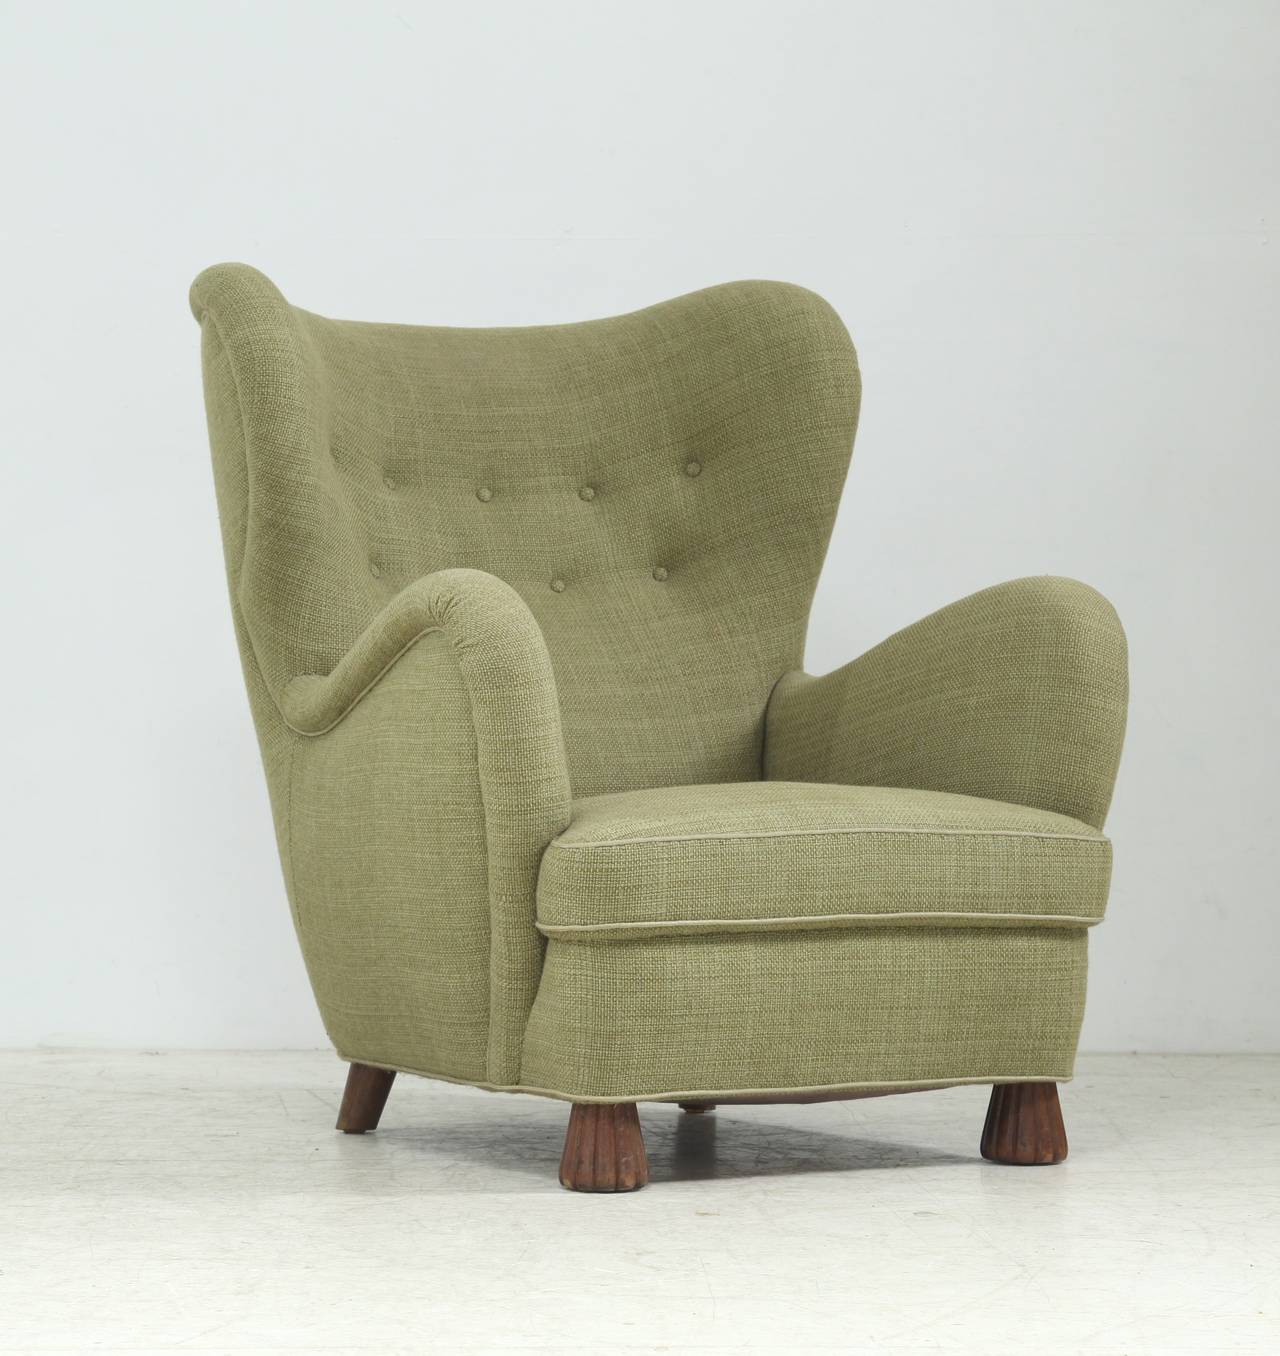 Perfect condition chair designed by architect Otto Schulz for his company Boet, Gothenburg, 1930.

Beautiful moss green upholstery in an excellent condition.